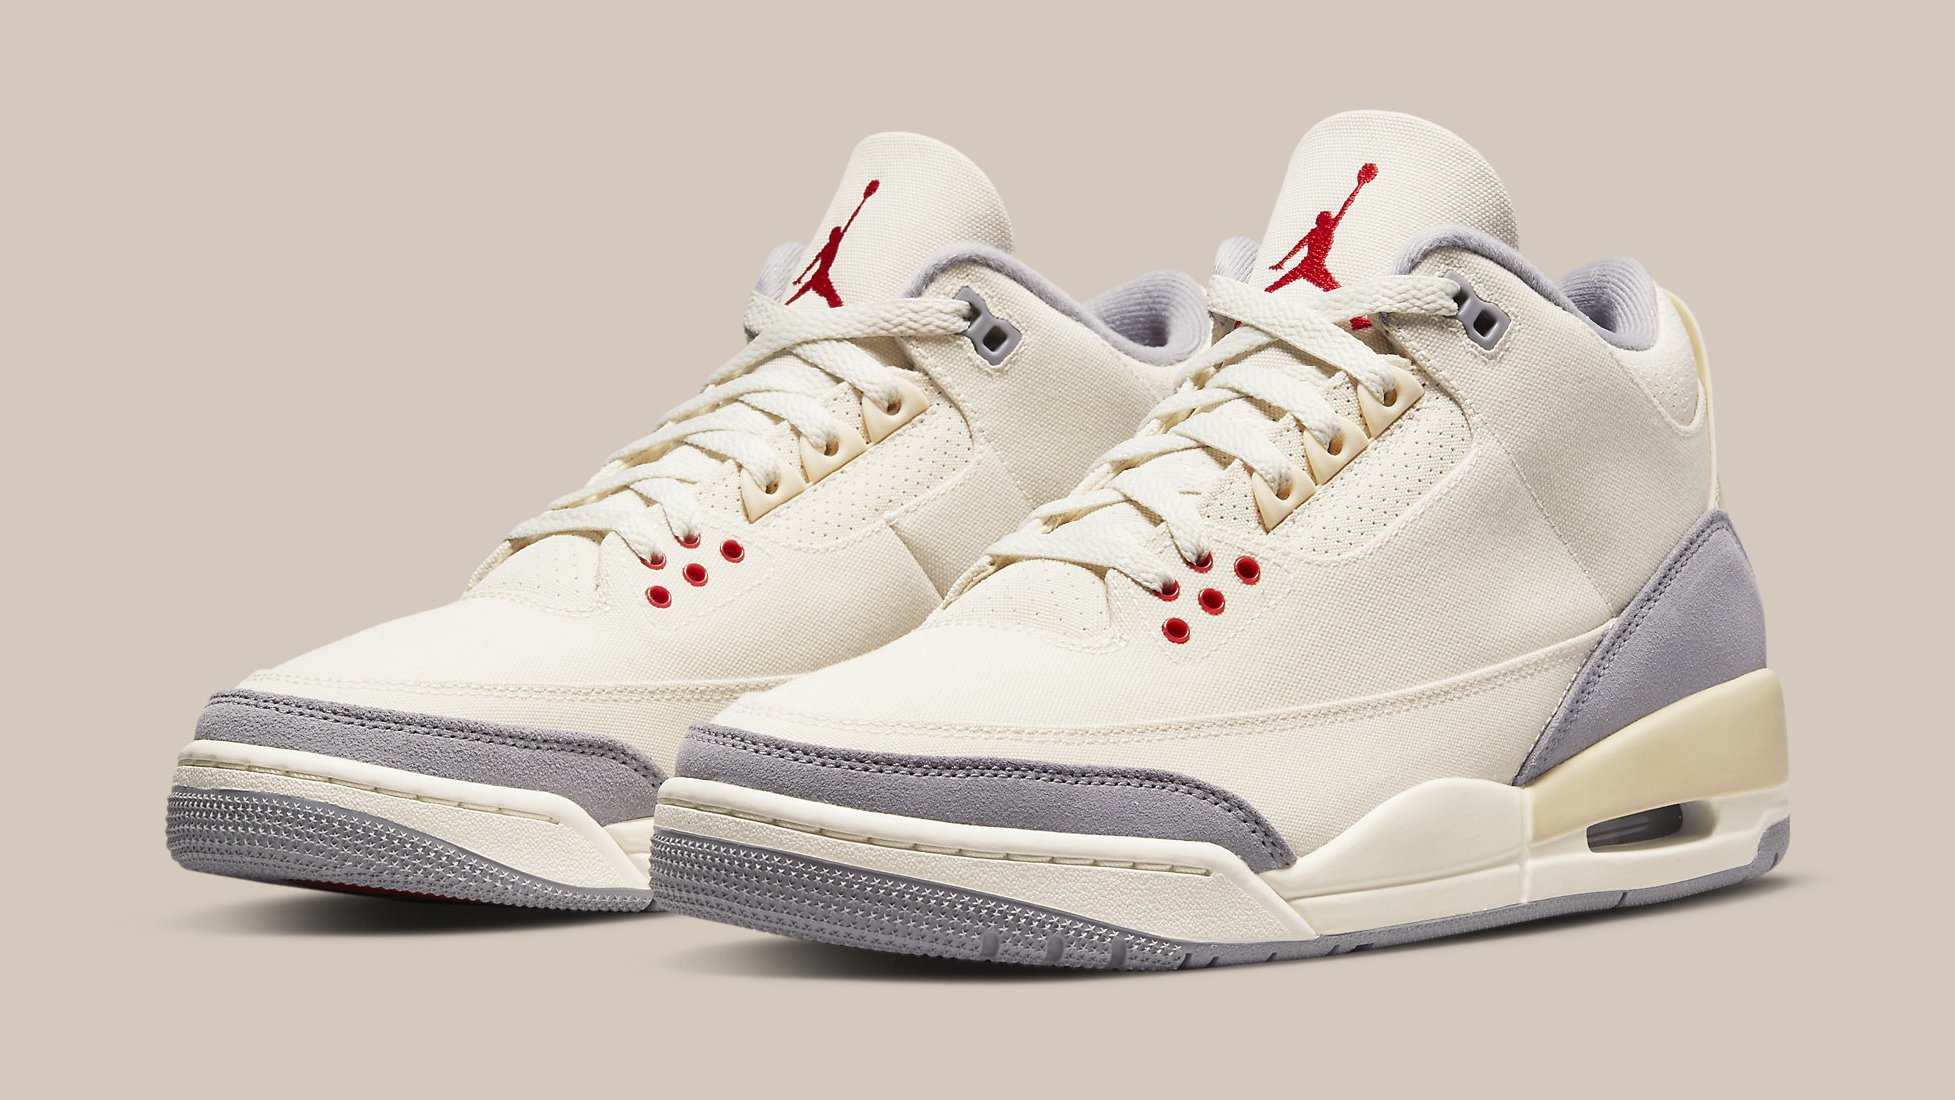 human resources comfort agreement Air Jordan 3 Retro 'Muslin' DH7139-100​​​​​​​ Release Date | Sole Collector